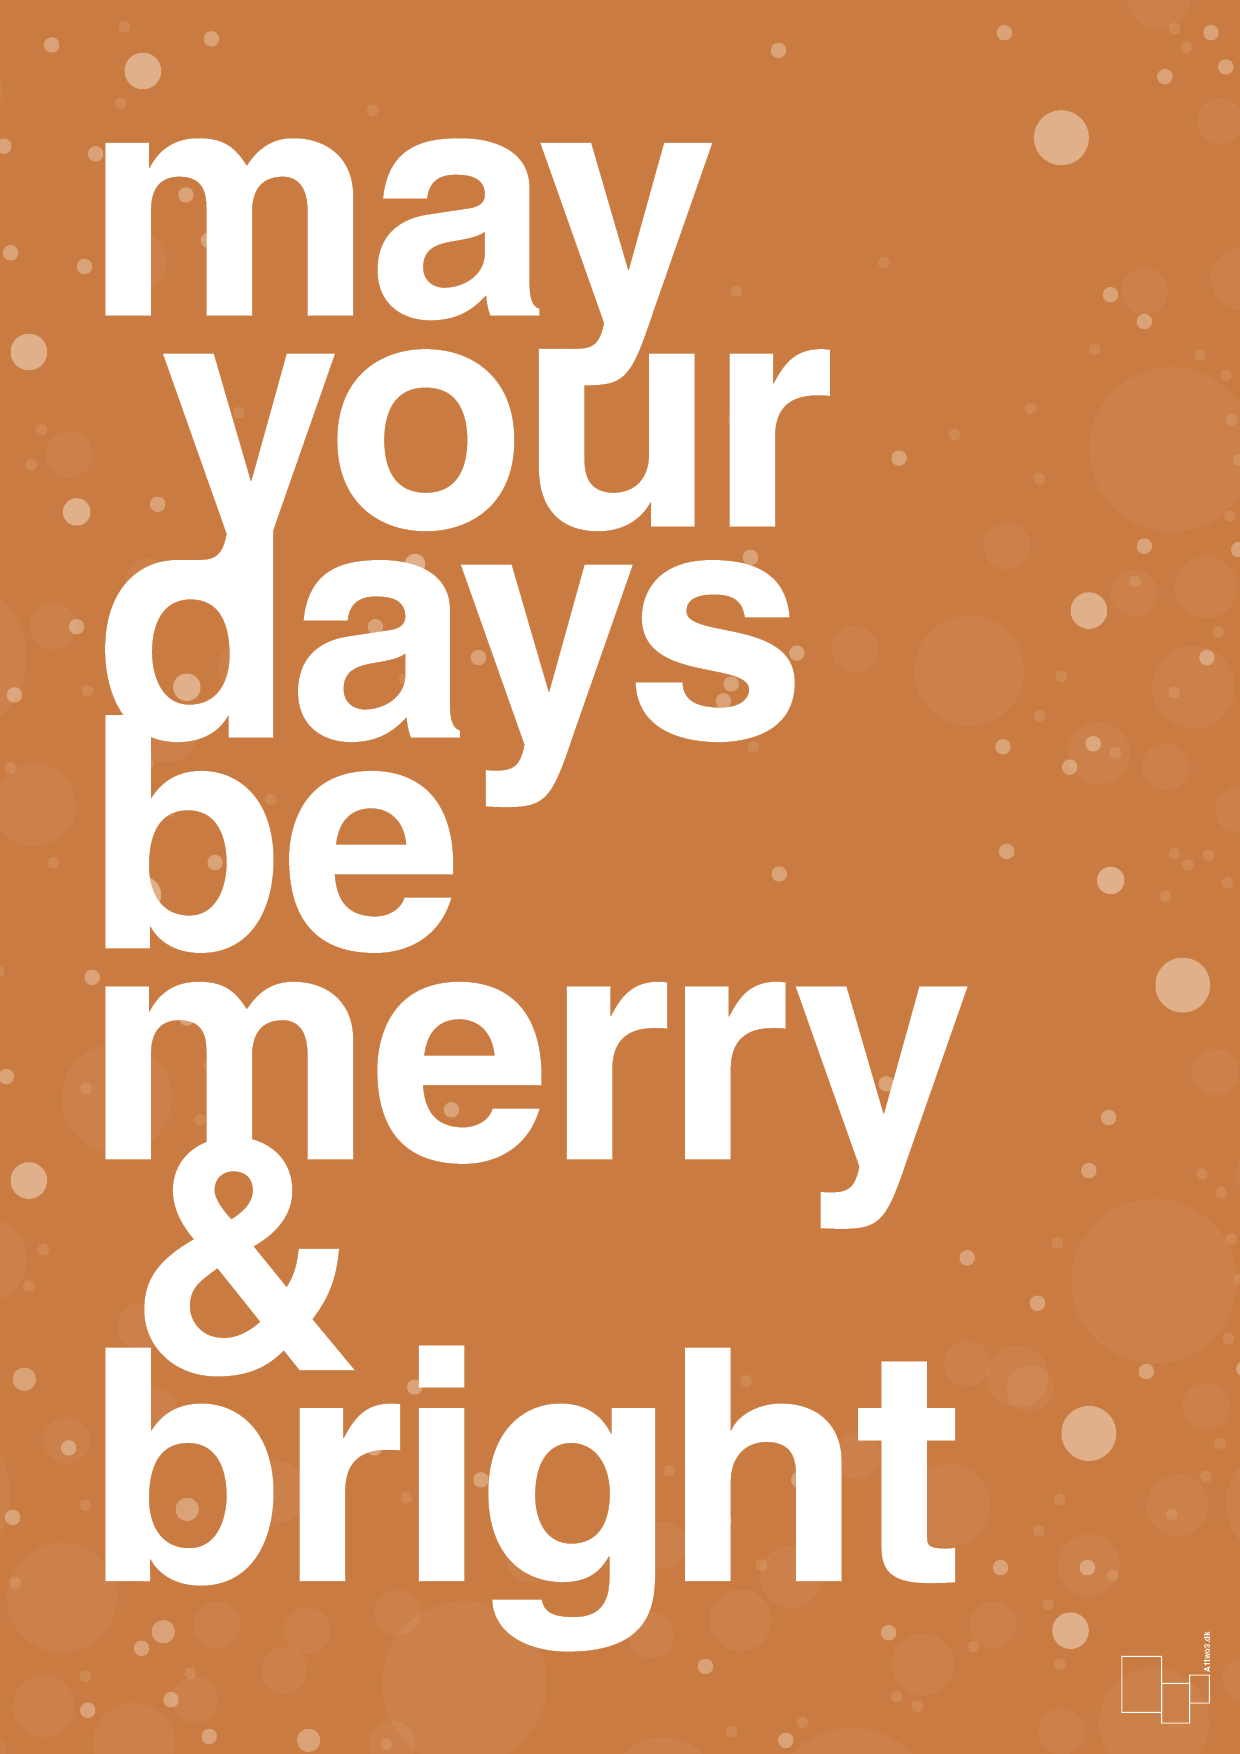 may your days be merry and bright - Plakat med Begivenheder i Rumba Orange